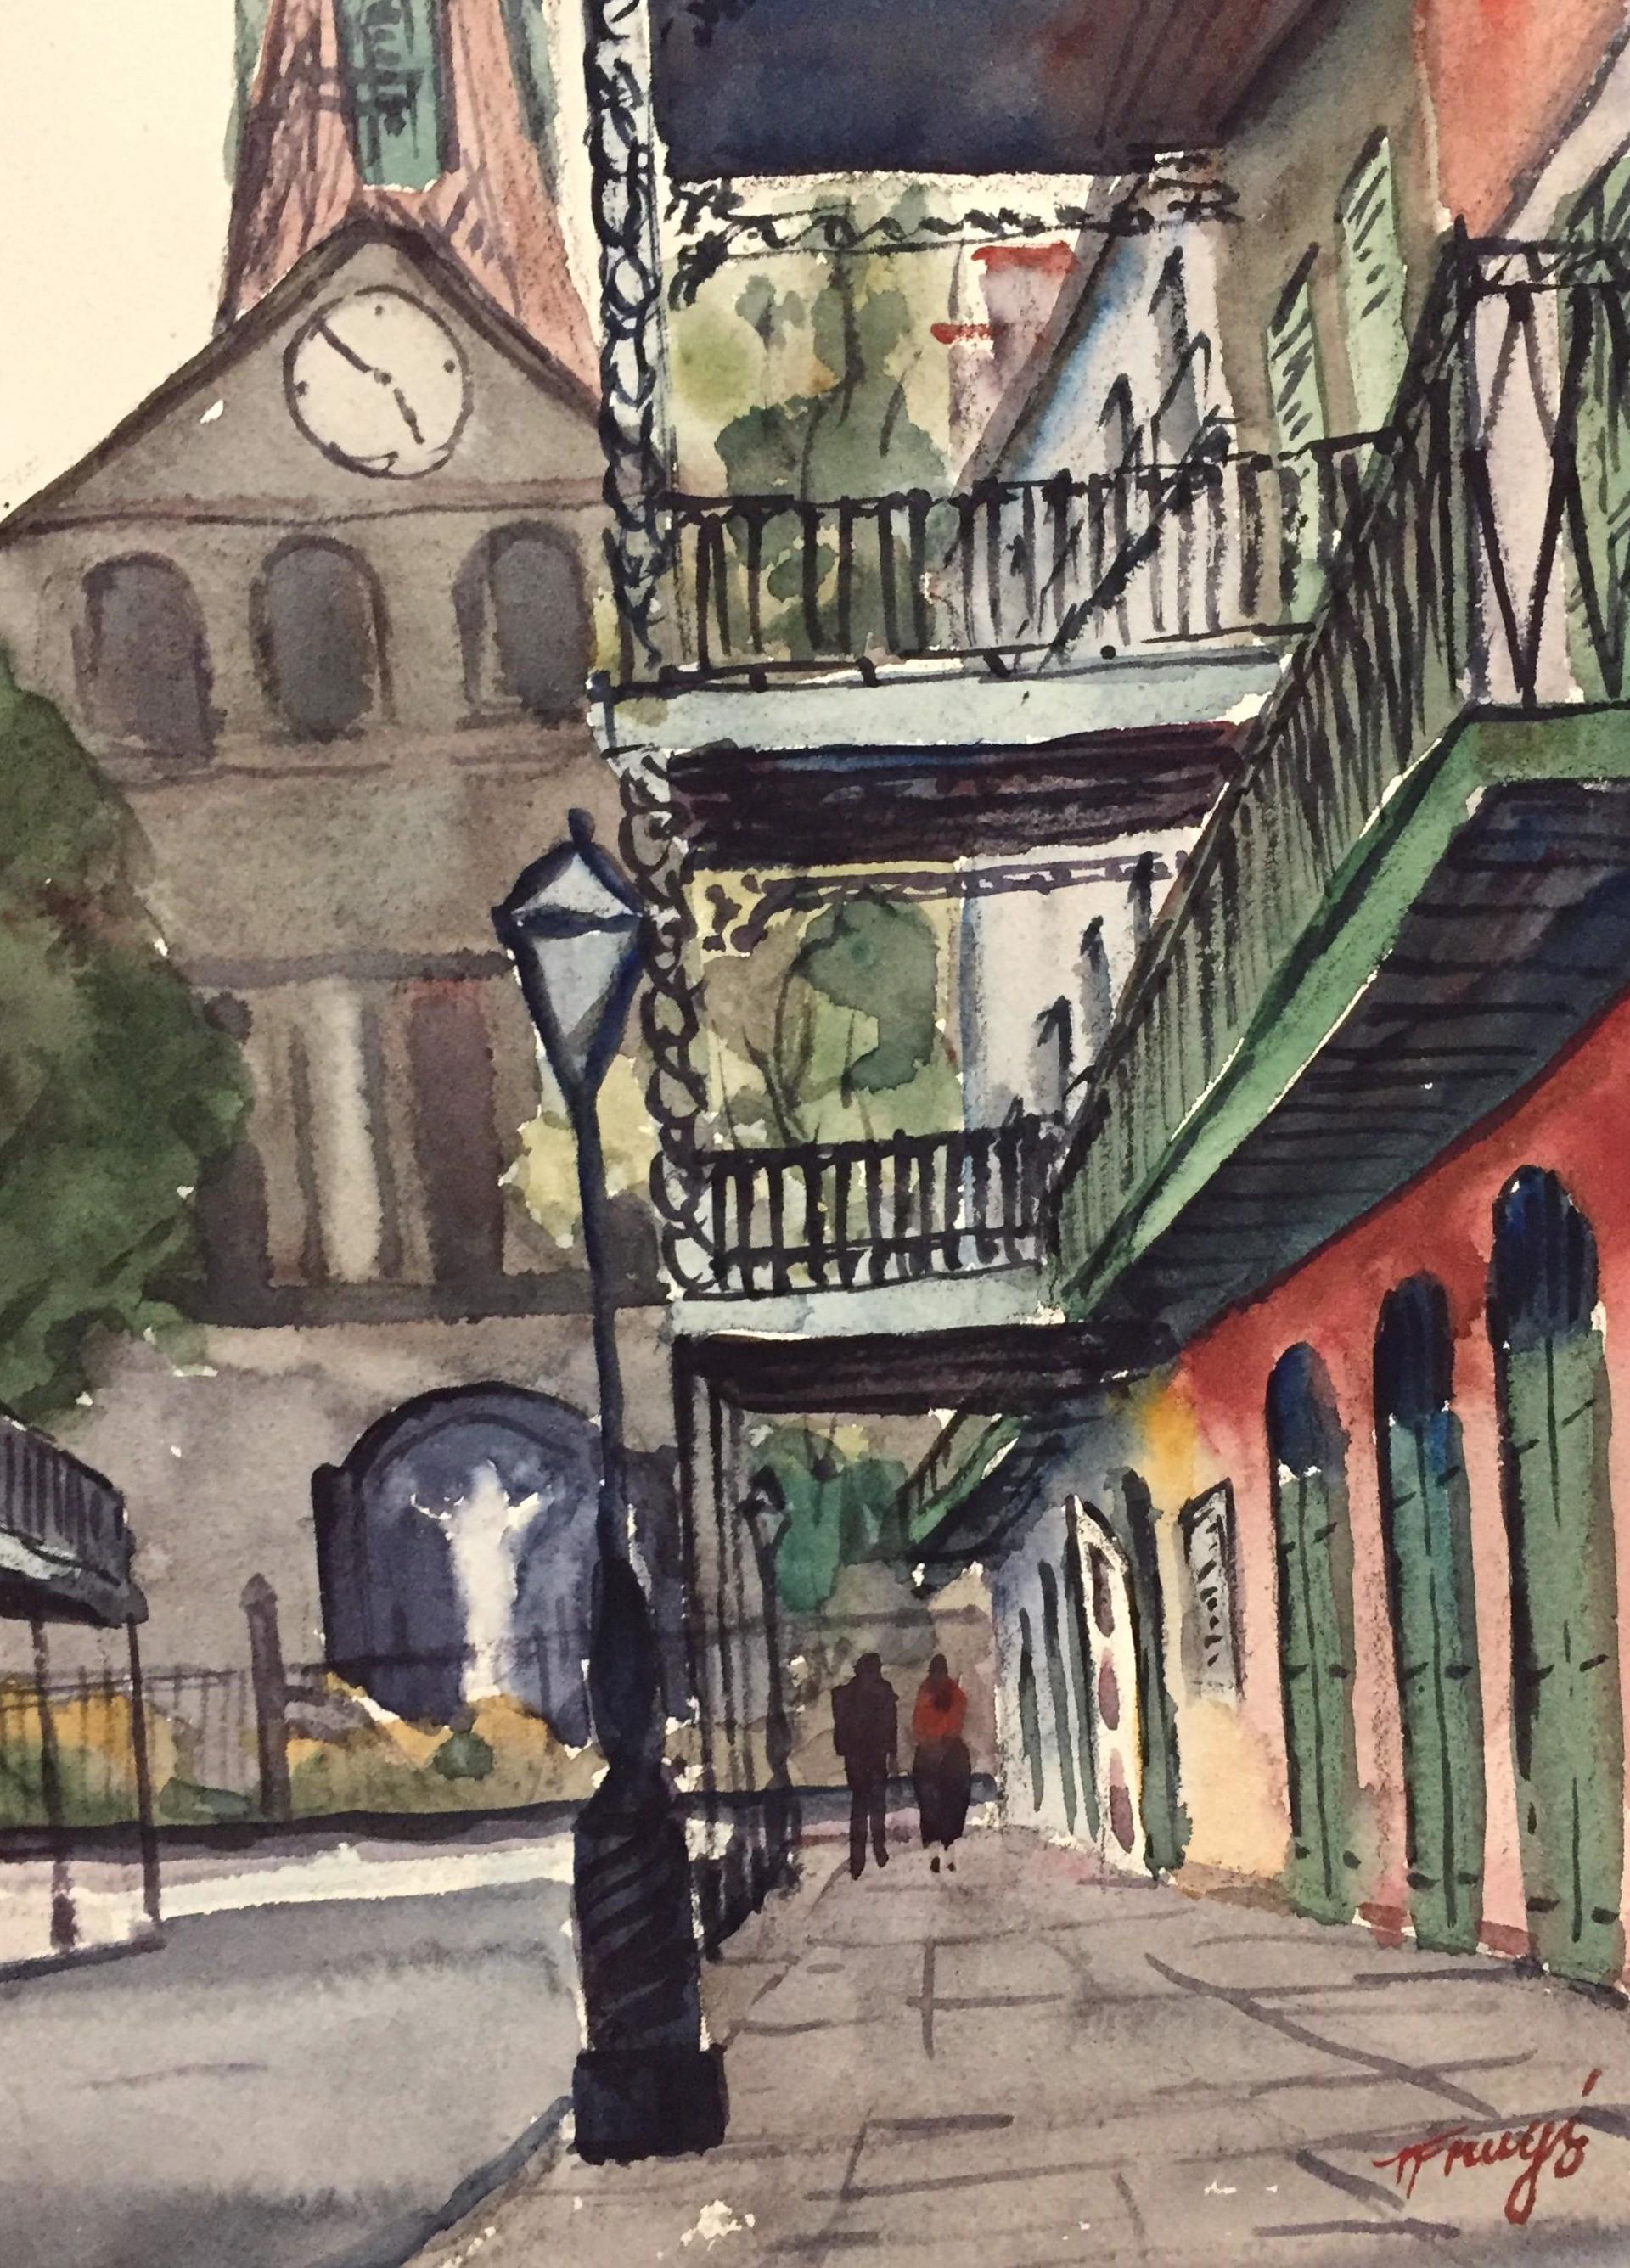 French Quarter Scene (Behind St. Louis Cathedral - New Orleans Painting) - Art by Nestor Fruge